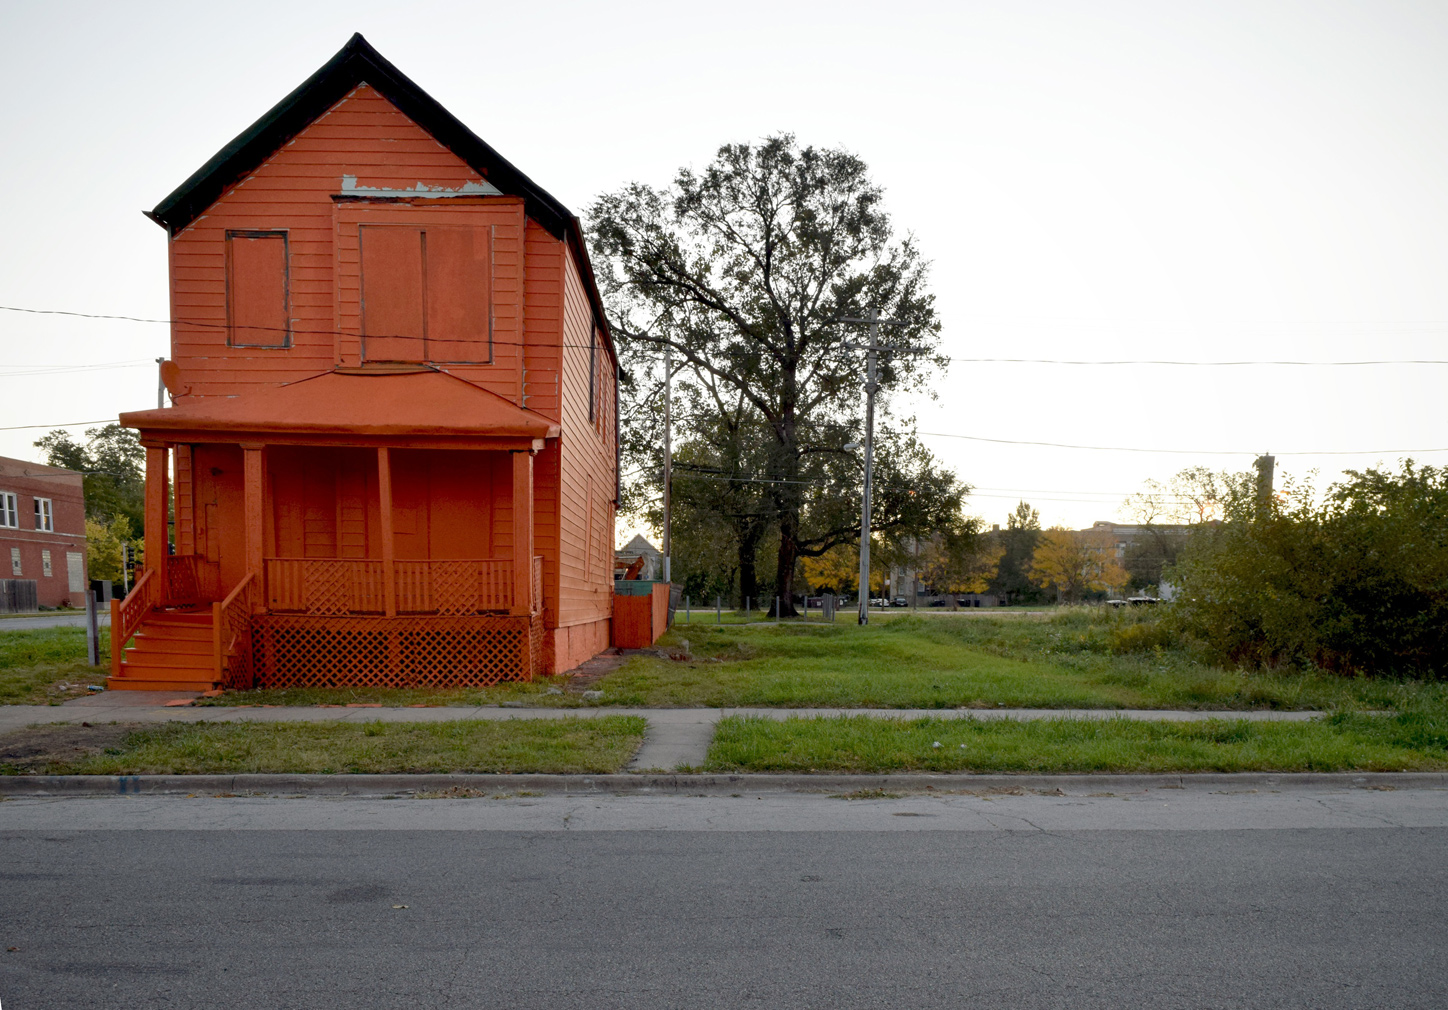 Abandoned house painted in Flamin' Hot Cheetos orange by Amanda Williams (c)